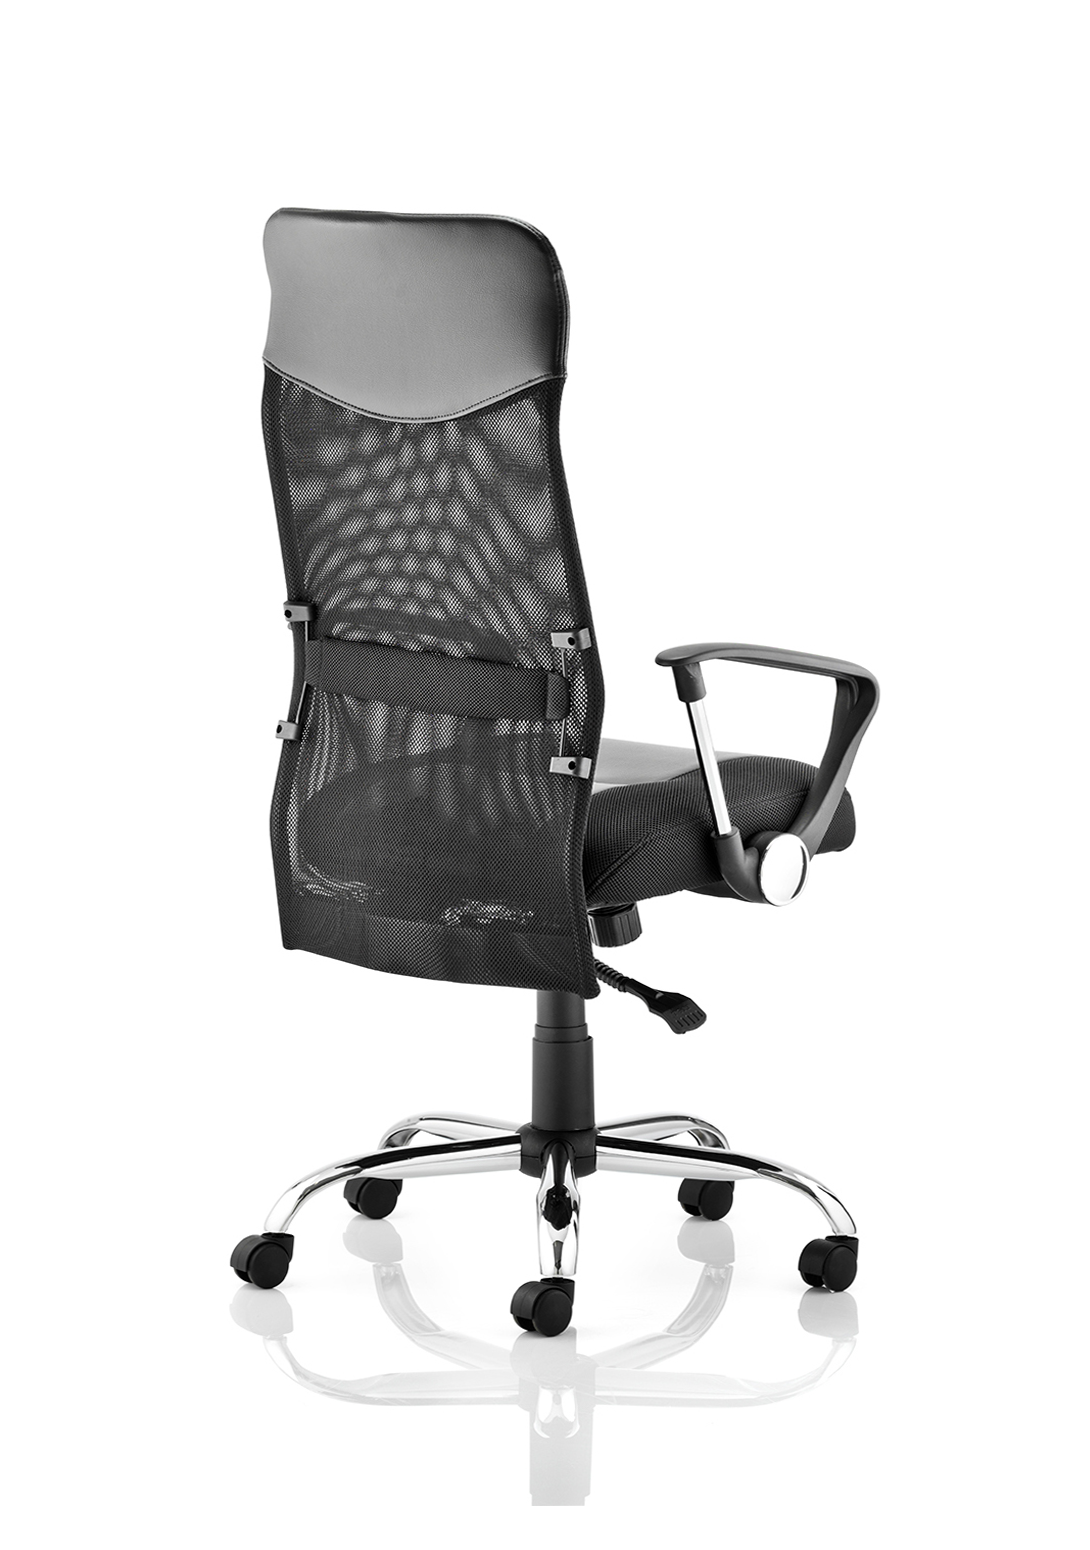 Vegas High Back Black Executive Office Chair with Arms